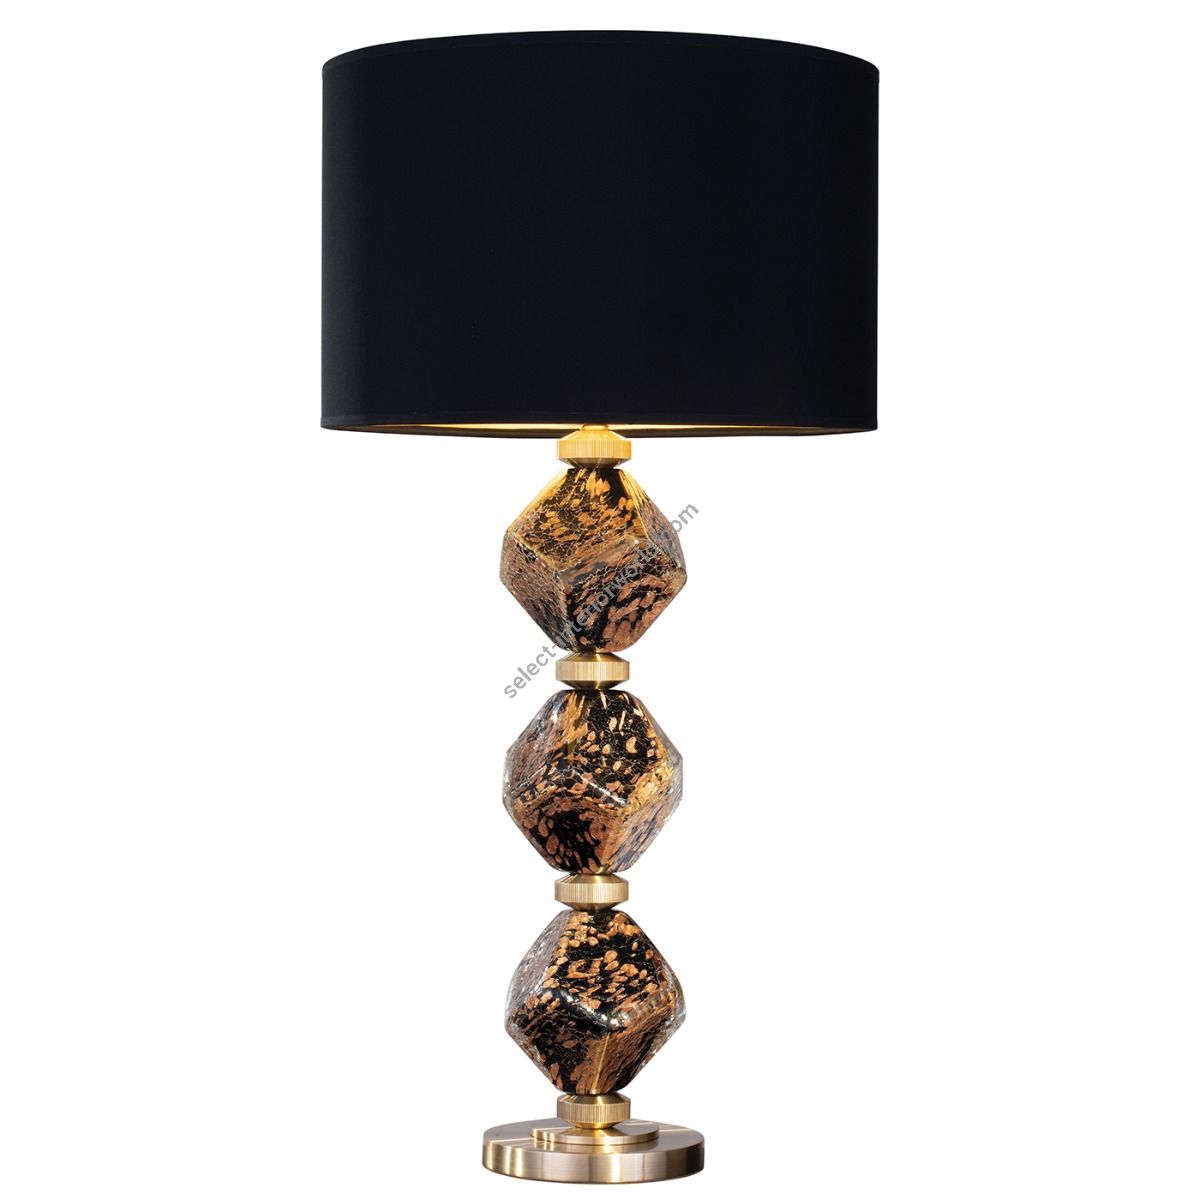 Natural Inspirations 30.5″ Table Lamp 900010 by Fine Art Handcrafted Lighting